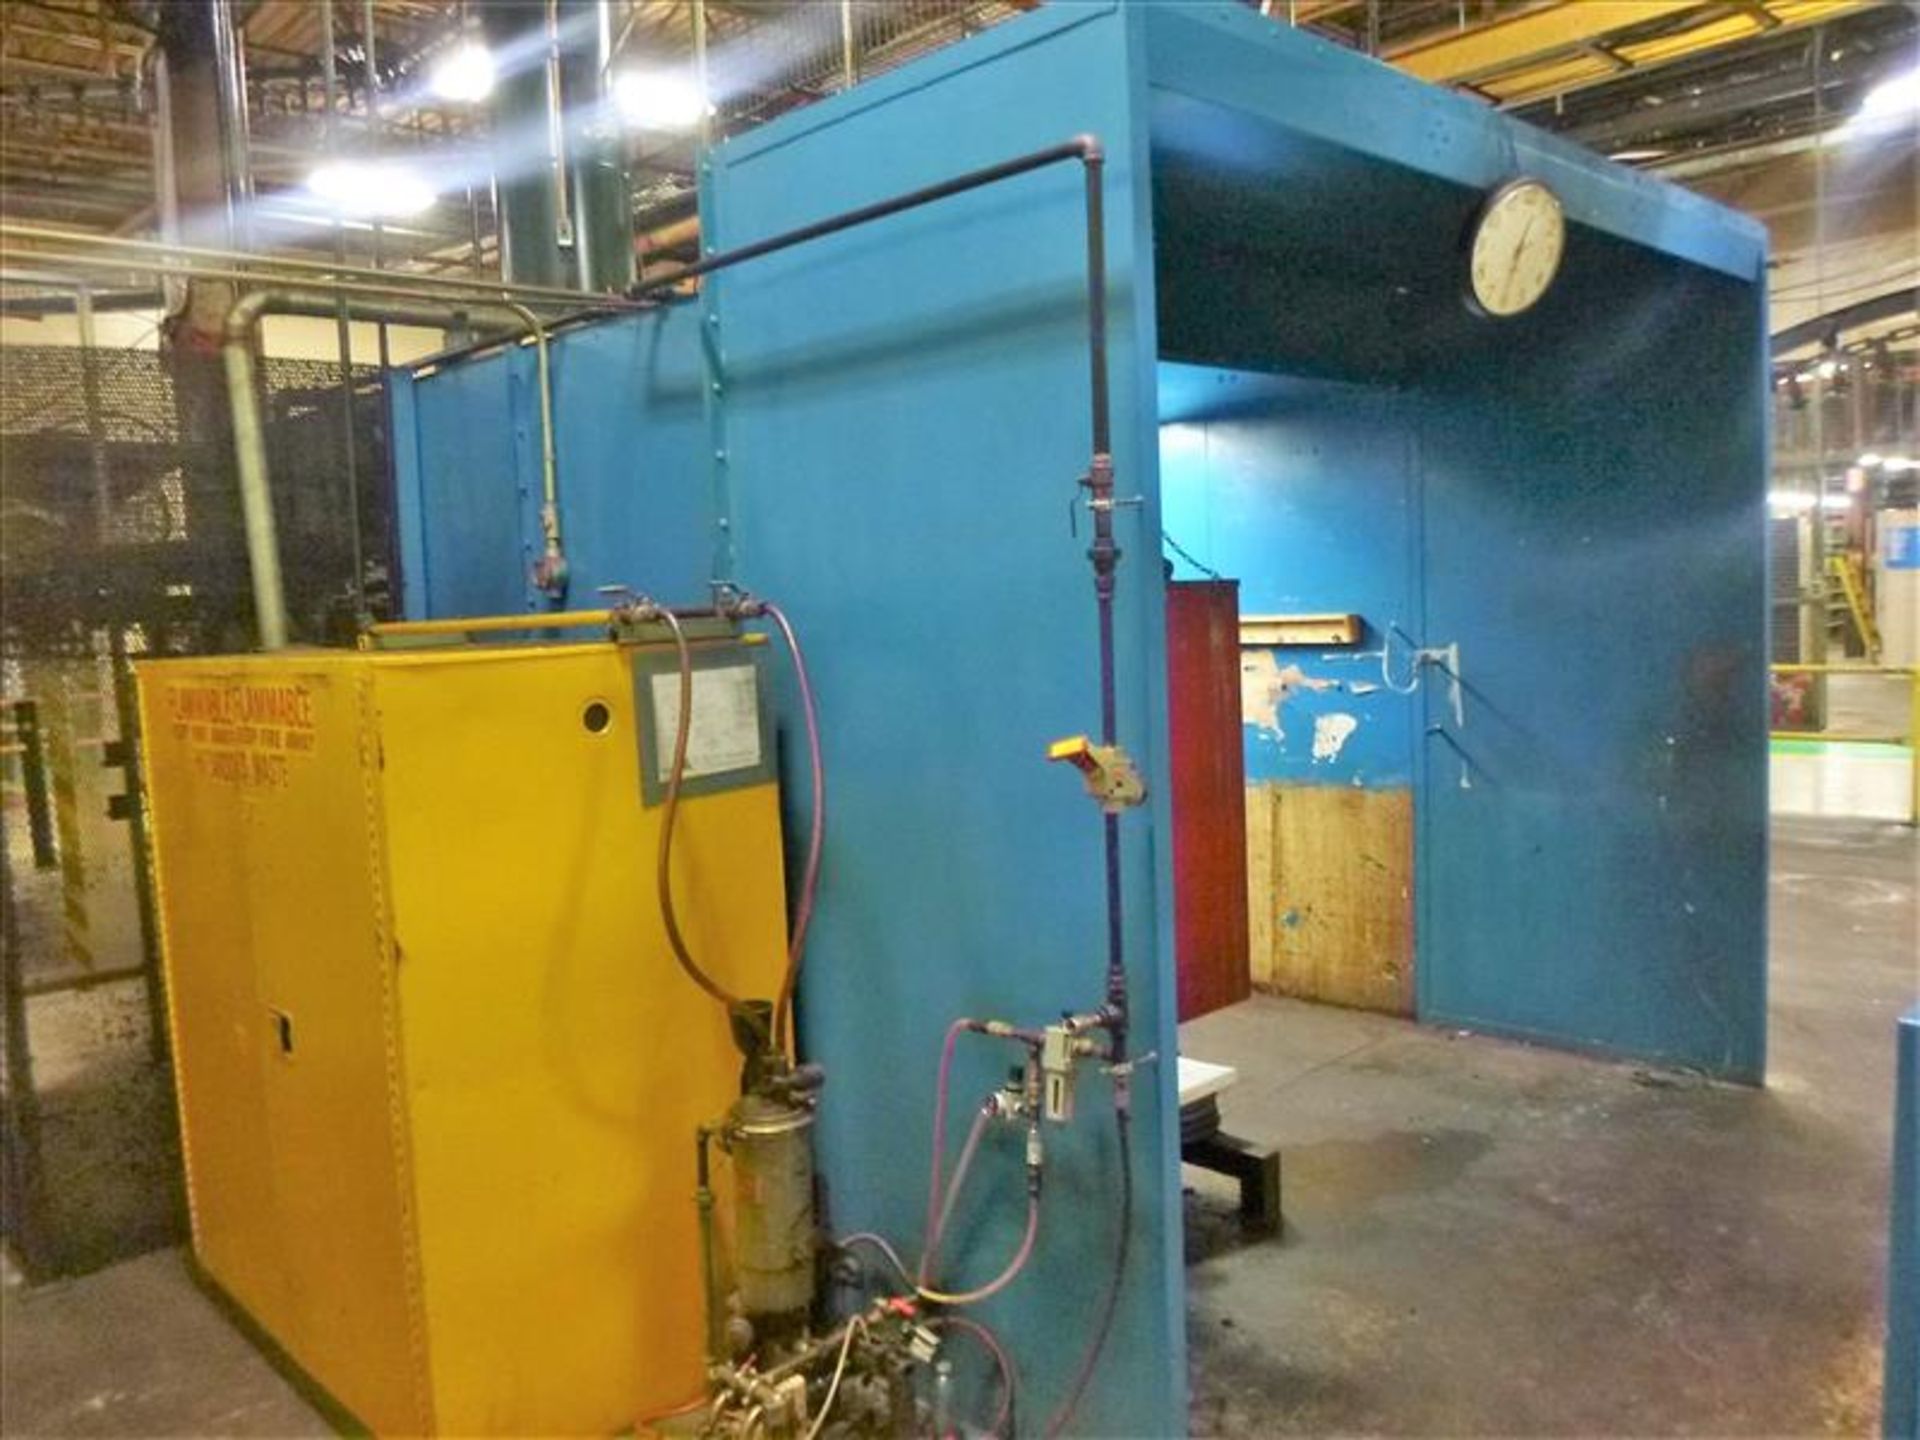 Manual Paint Booth w/ Fume Extraction System, approx. 10'x15'x9' high - Image 4 of 4